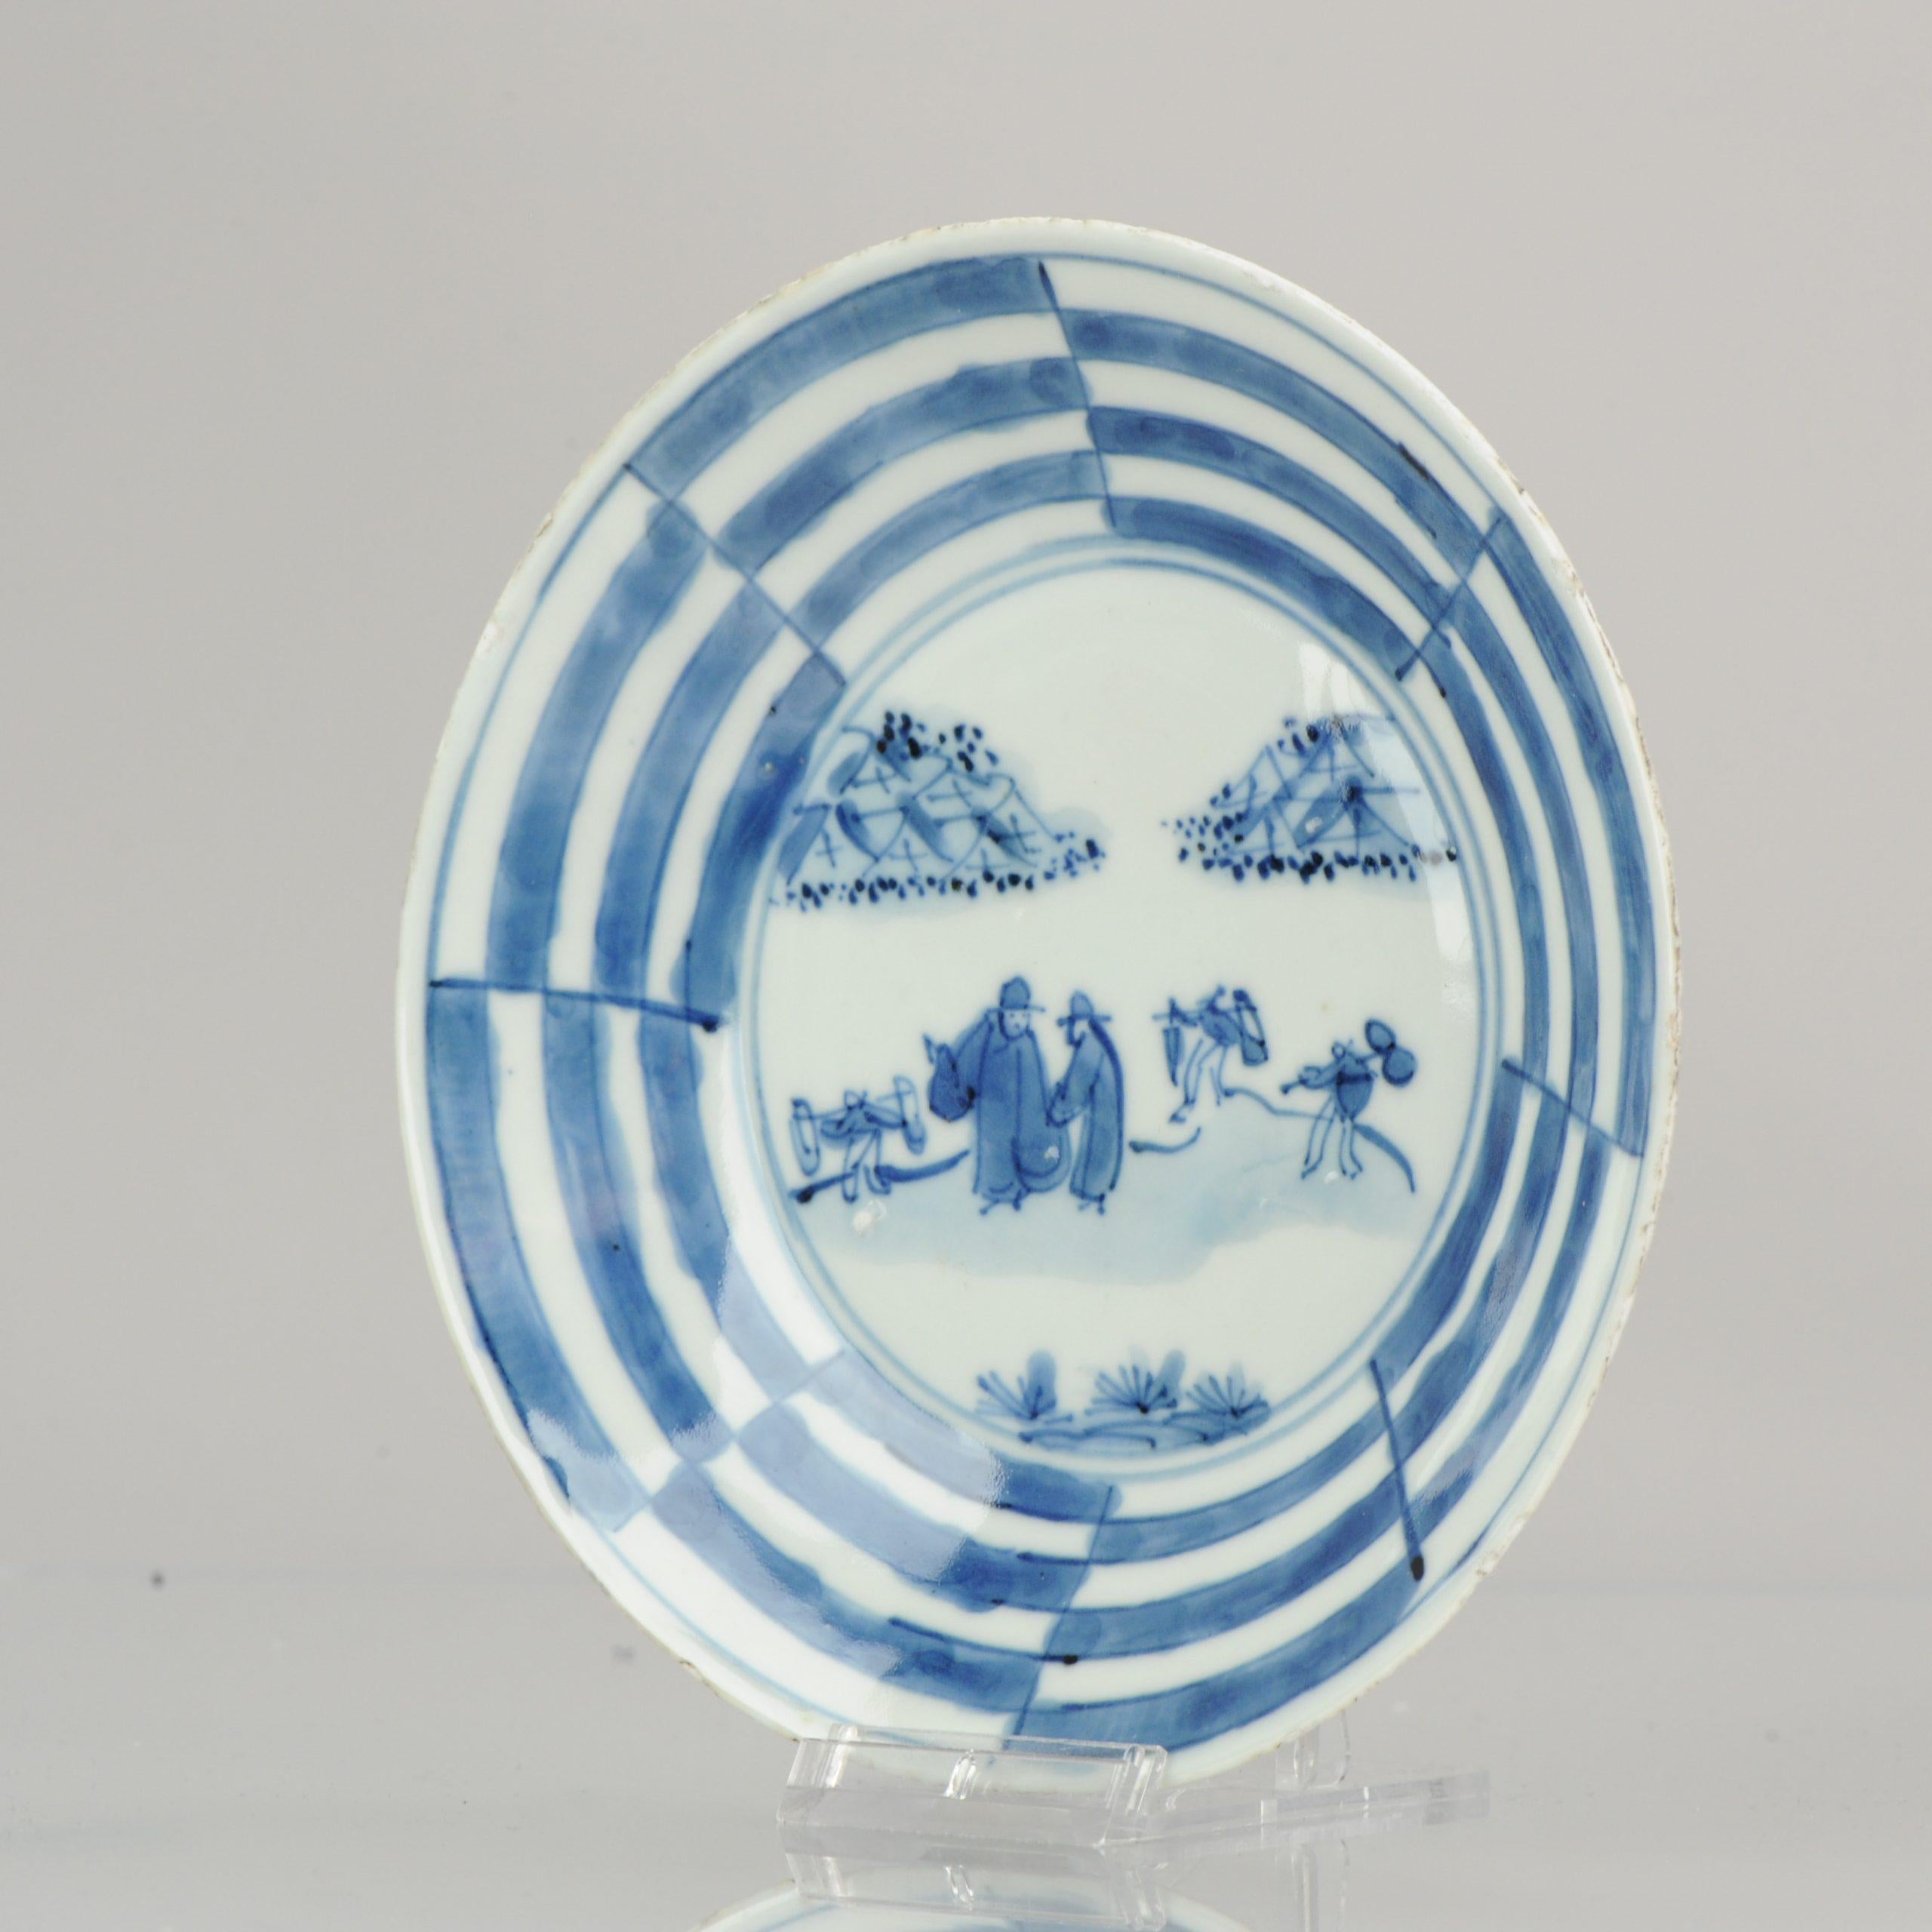 A very nicely decorated plate. Late Ming. Traders and travellers in a landscape. An extraordinary border pattern. Very rare type of plate.
Condition
Overall condition Rimfritting, 1 shallow chip/flint only. Size: 161 x 27mm
Period
17th century